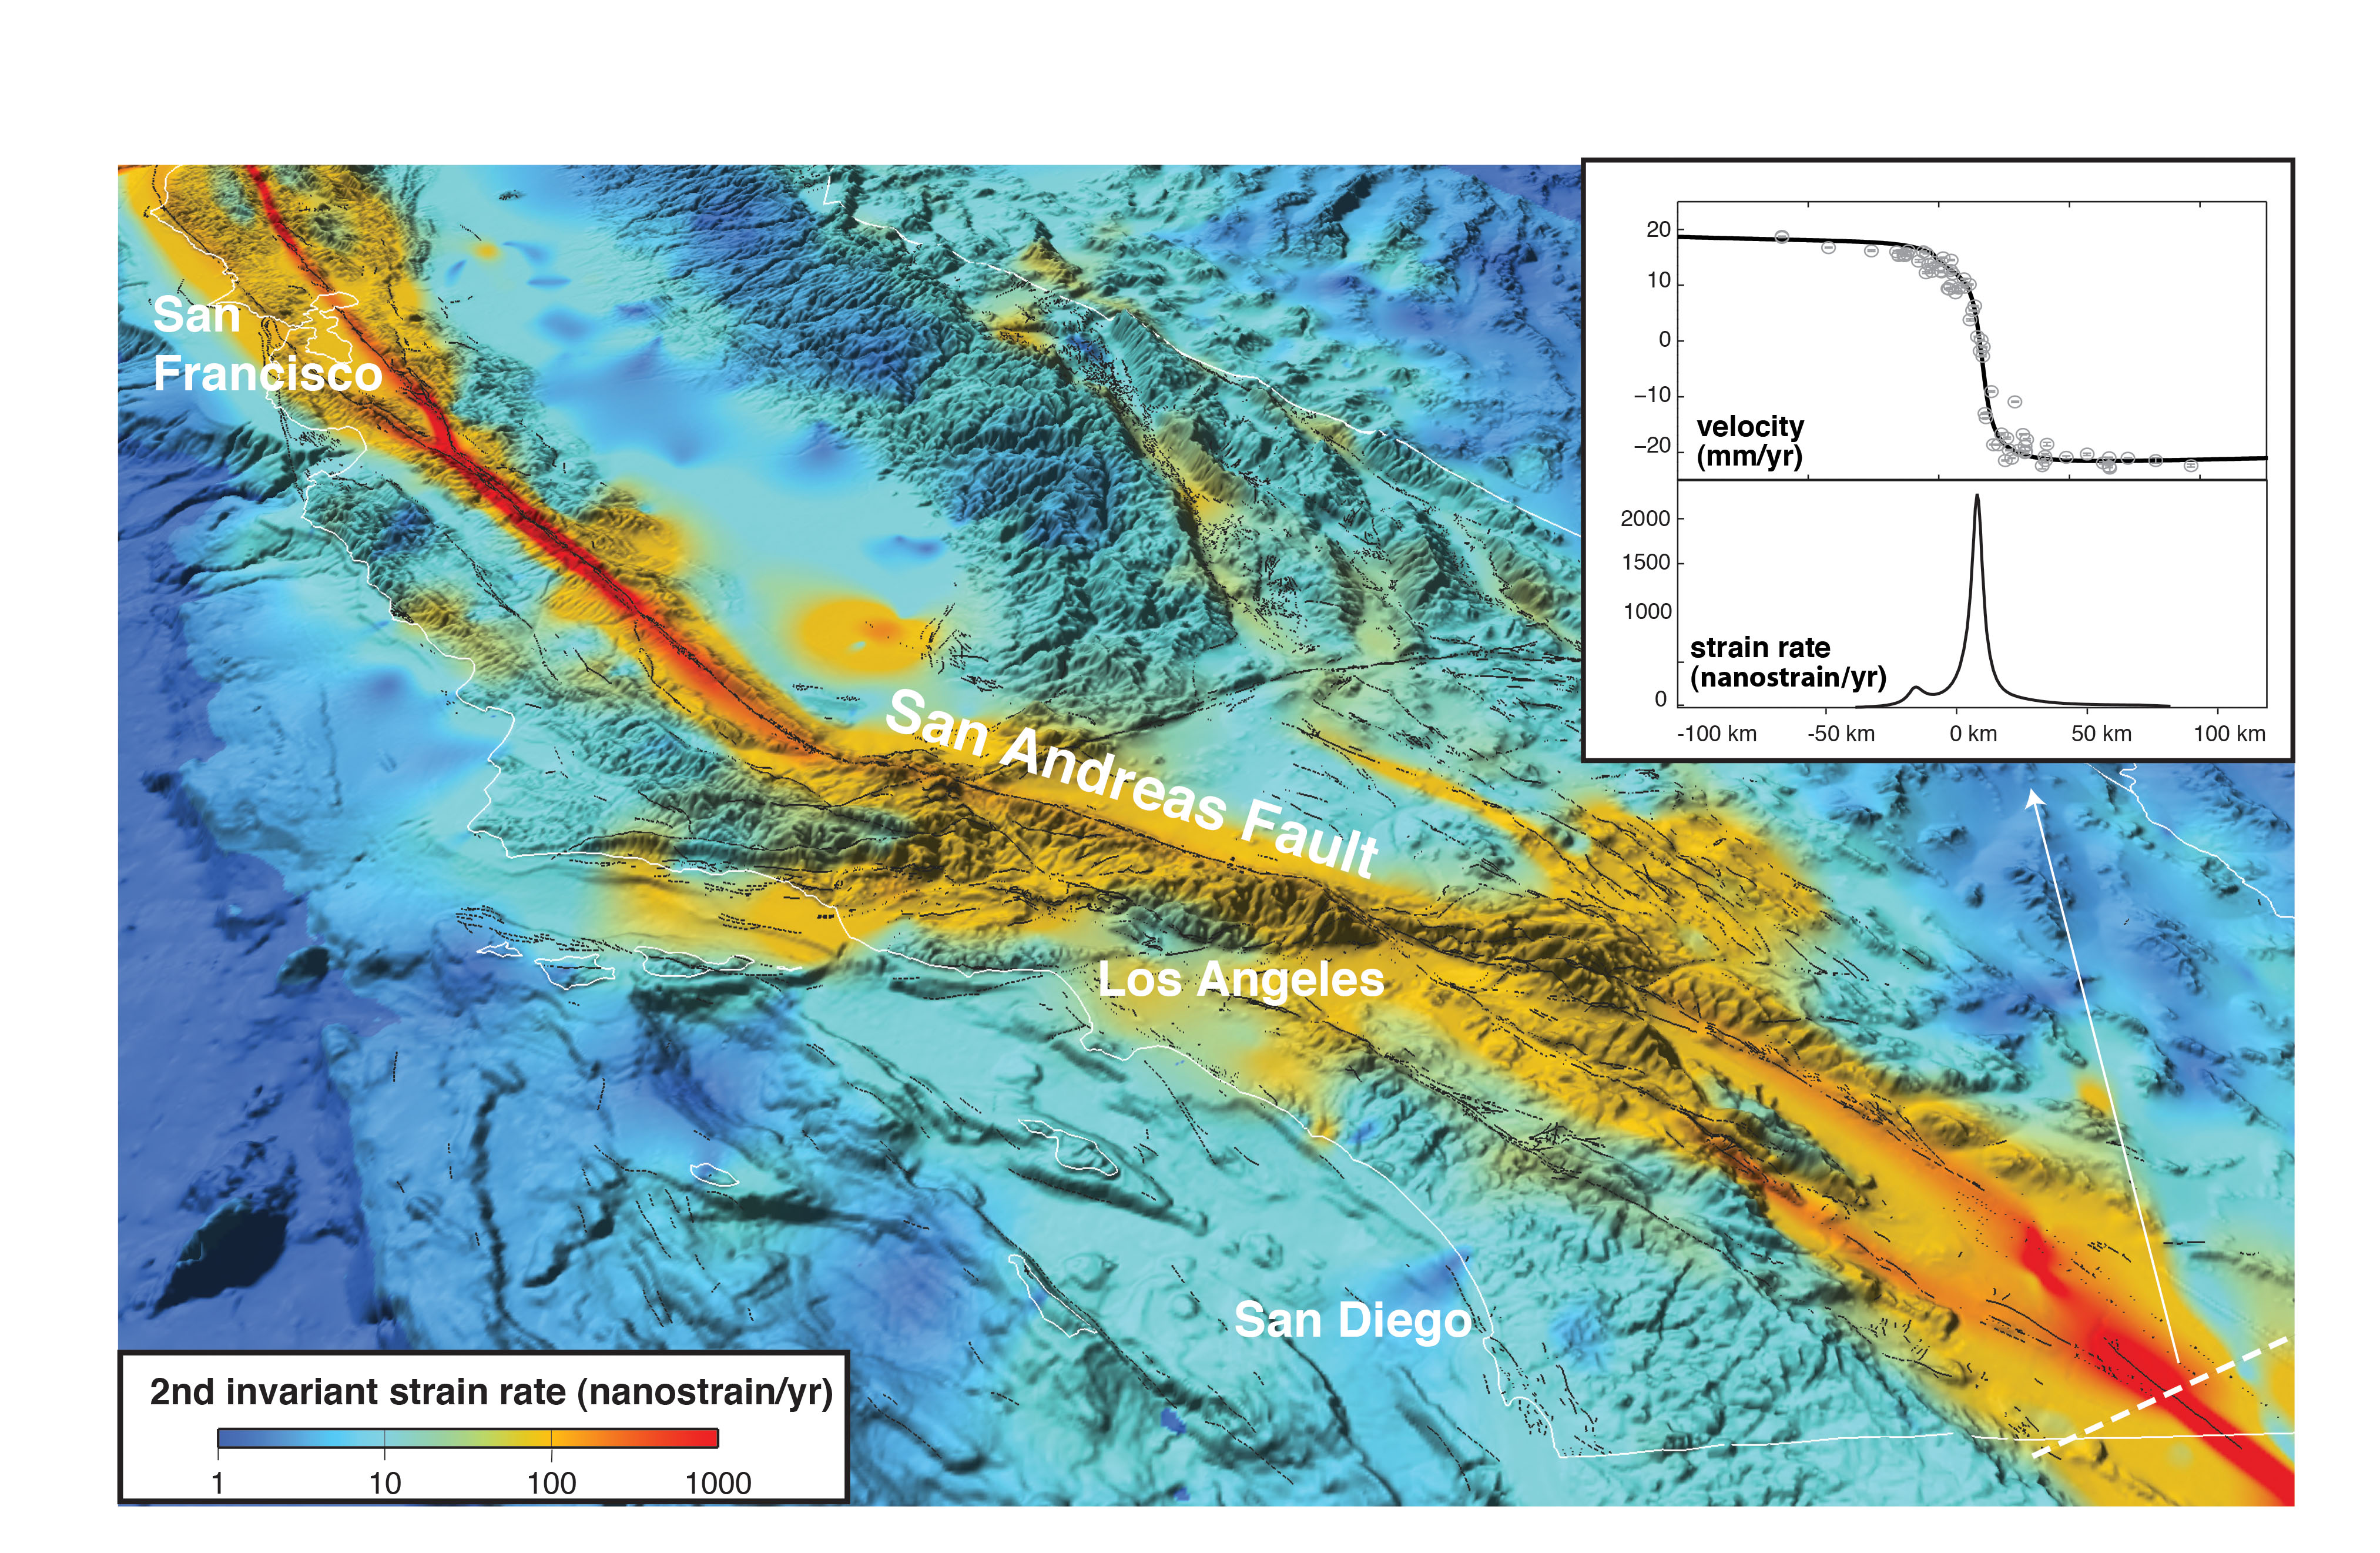 Strain rate, which is typically greatest within 10-50 km of an active fault, is calculated by taking the spatial derivative of measured crustal velocities.